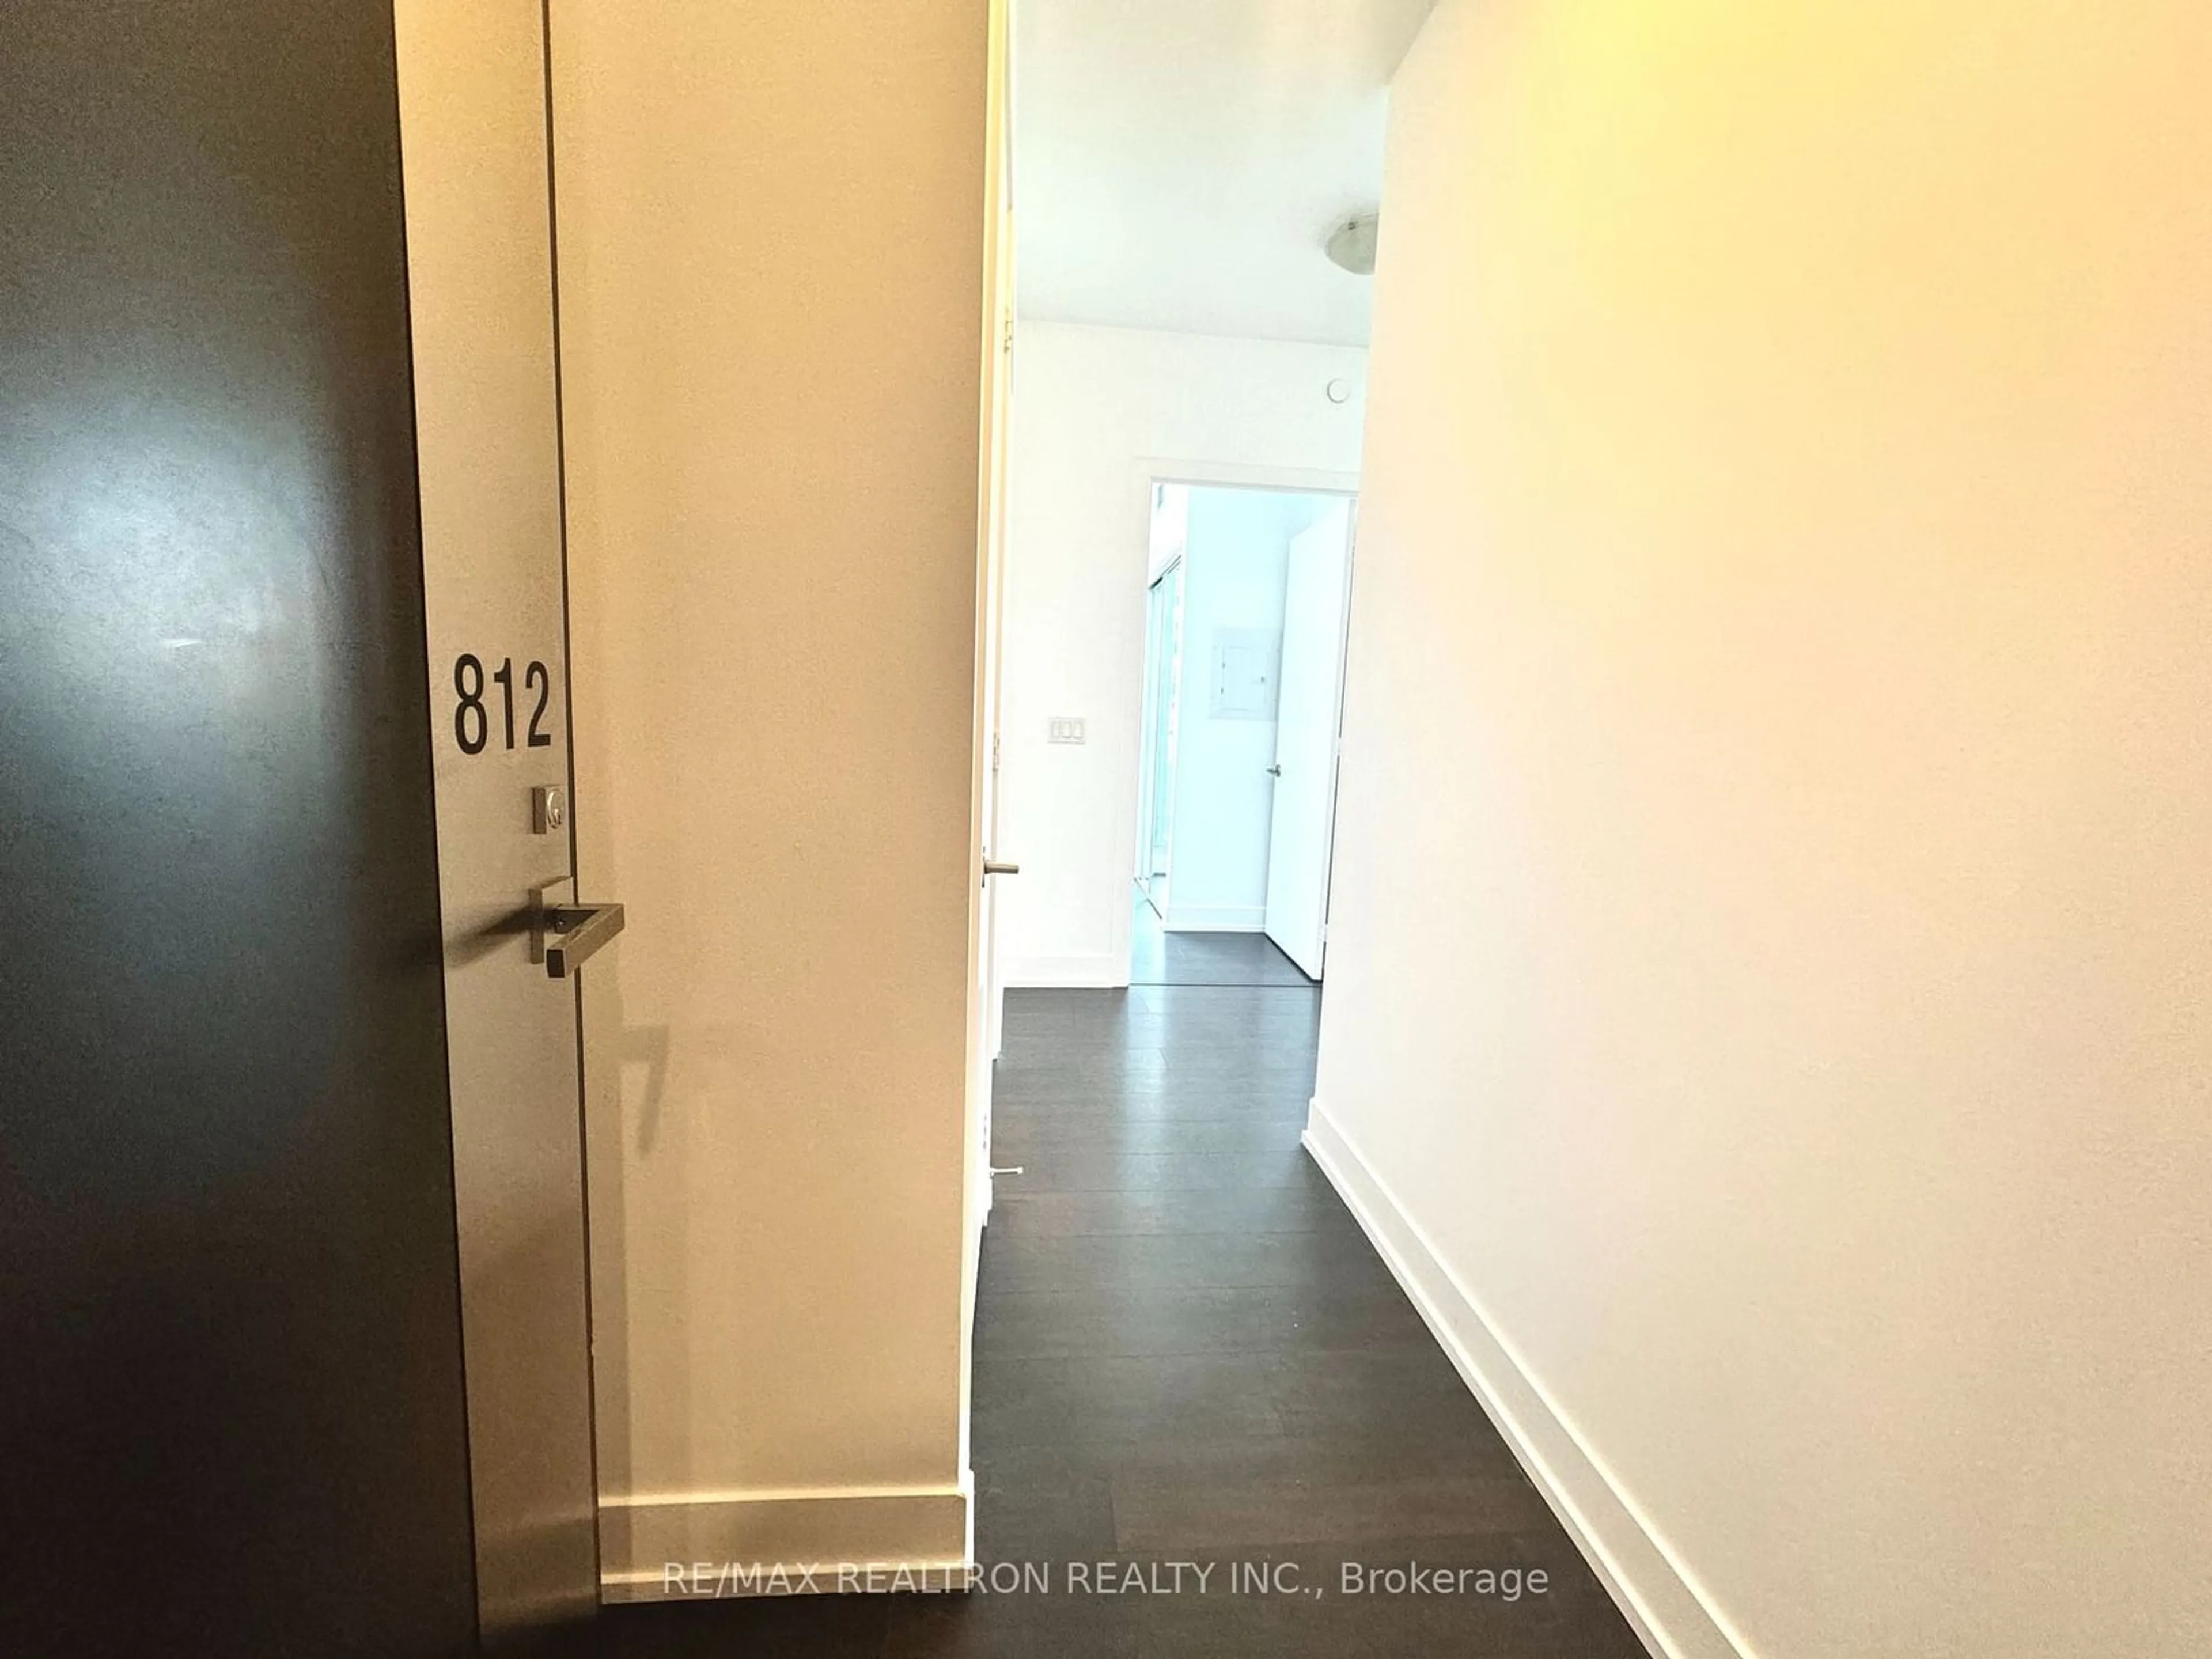 Indoor entryway for 9471 Yonge St #812, Richmond Hill Ontario L4C 0Z5